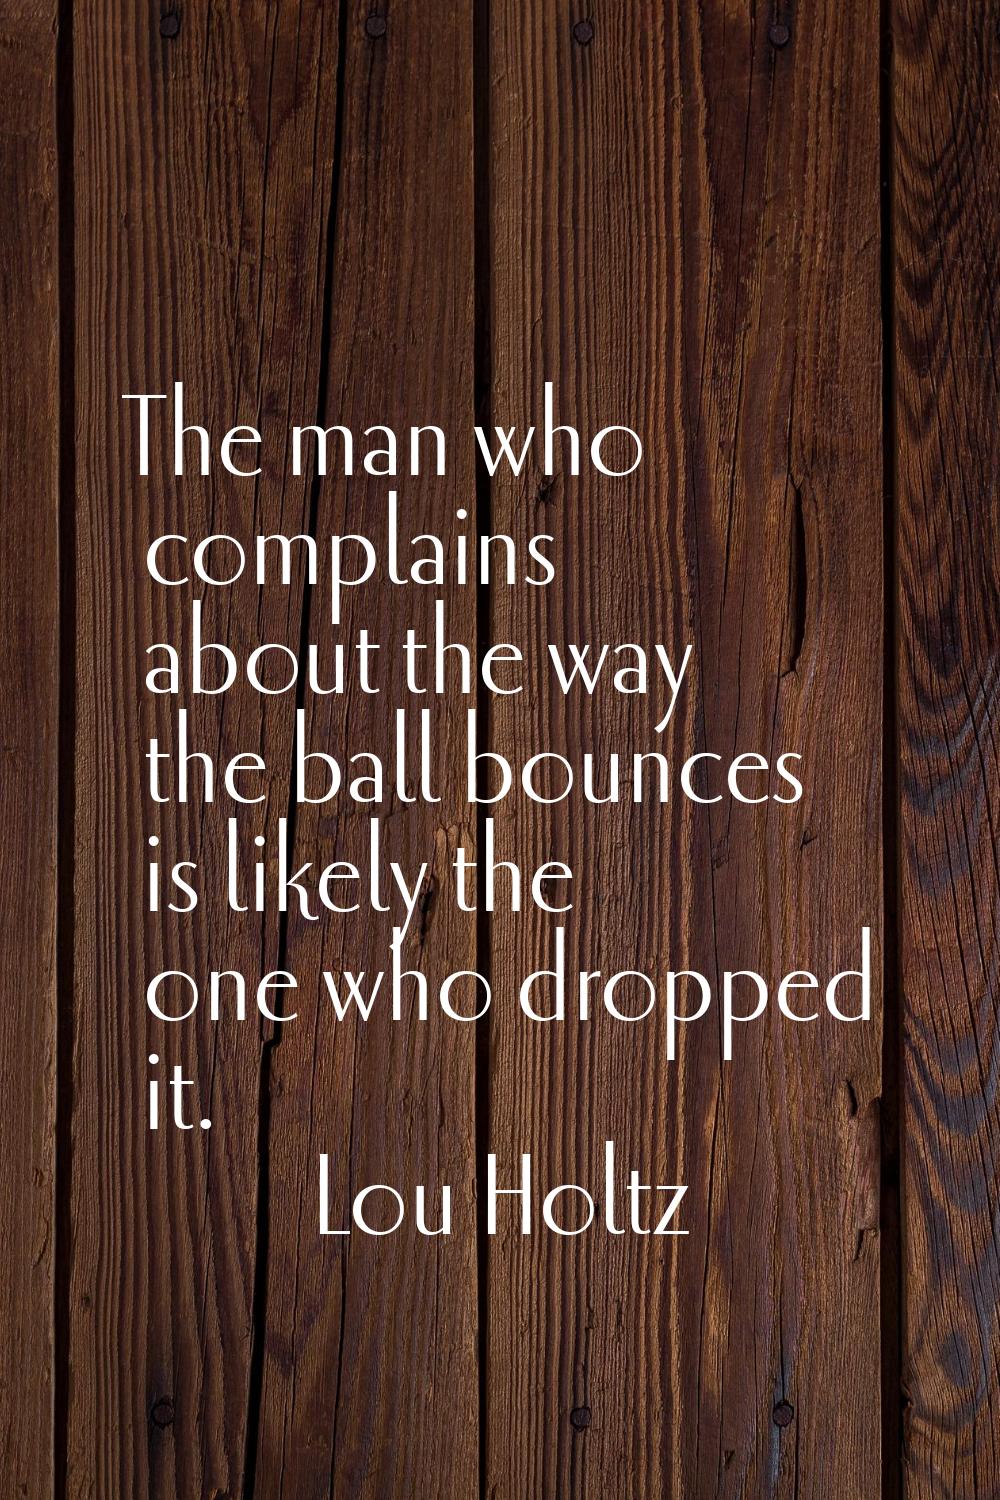 The man who complains about the way the ball bounces is likely the one who dropped it.